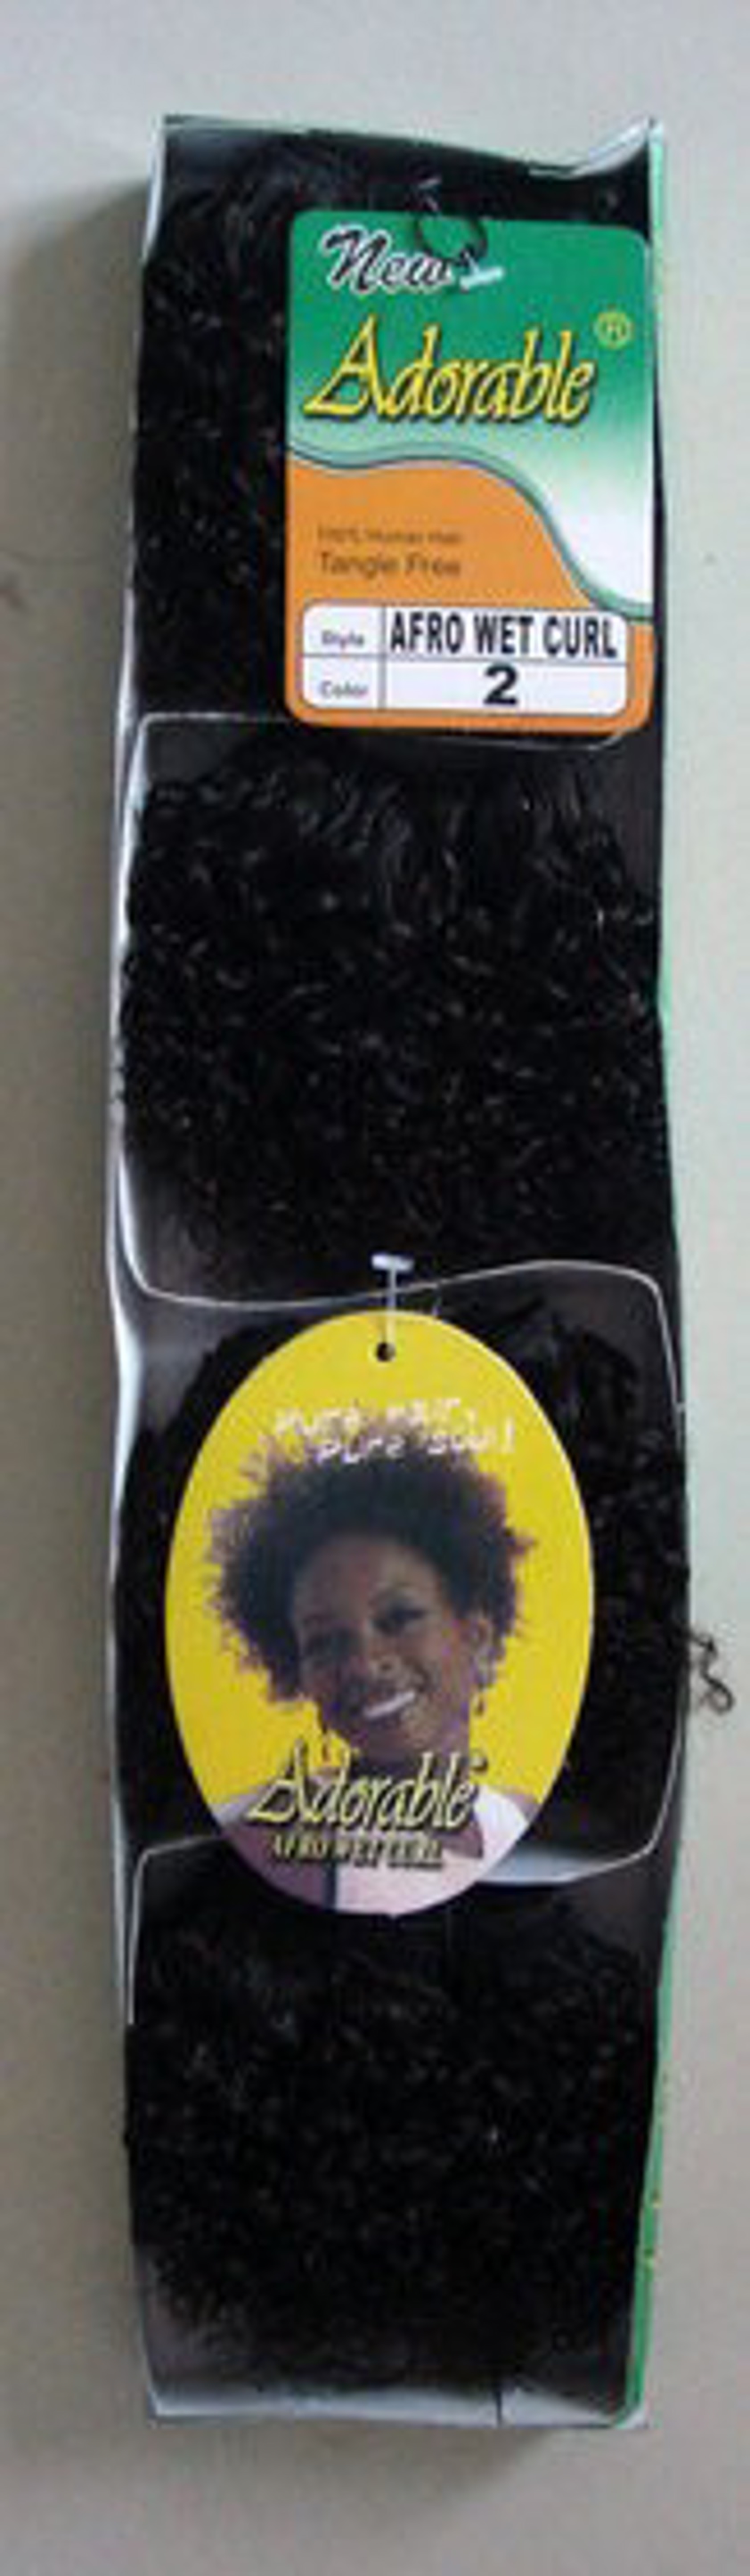 NEW ADORABLE AFRO WET CURL